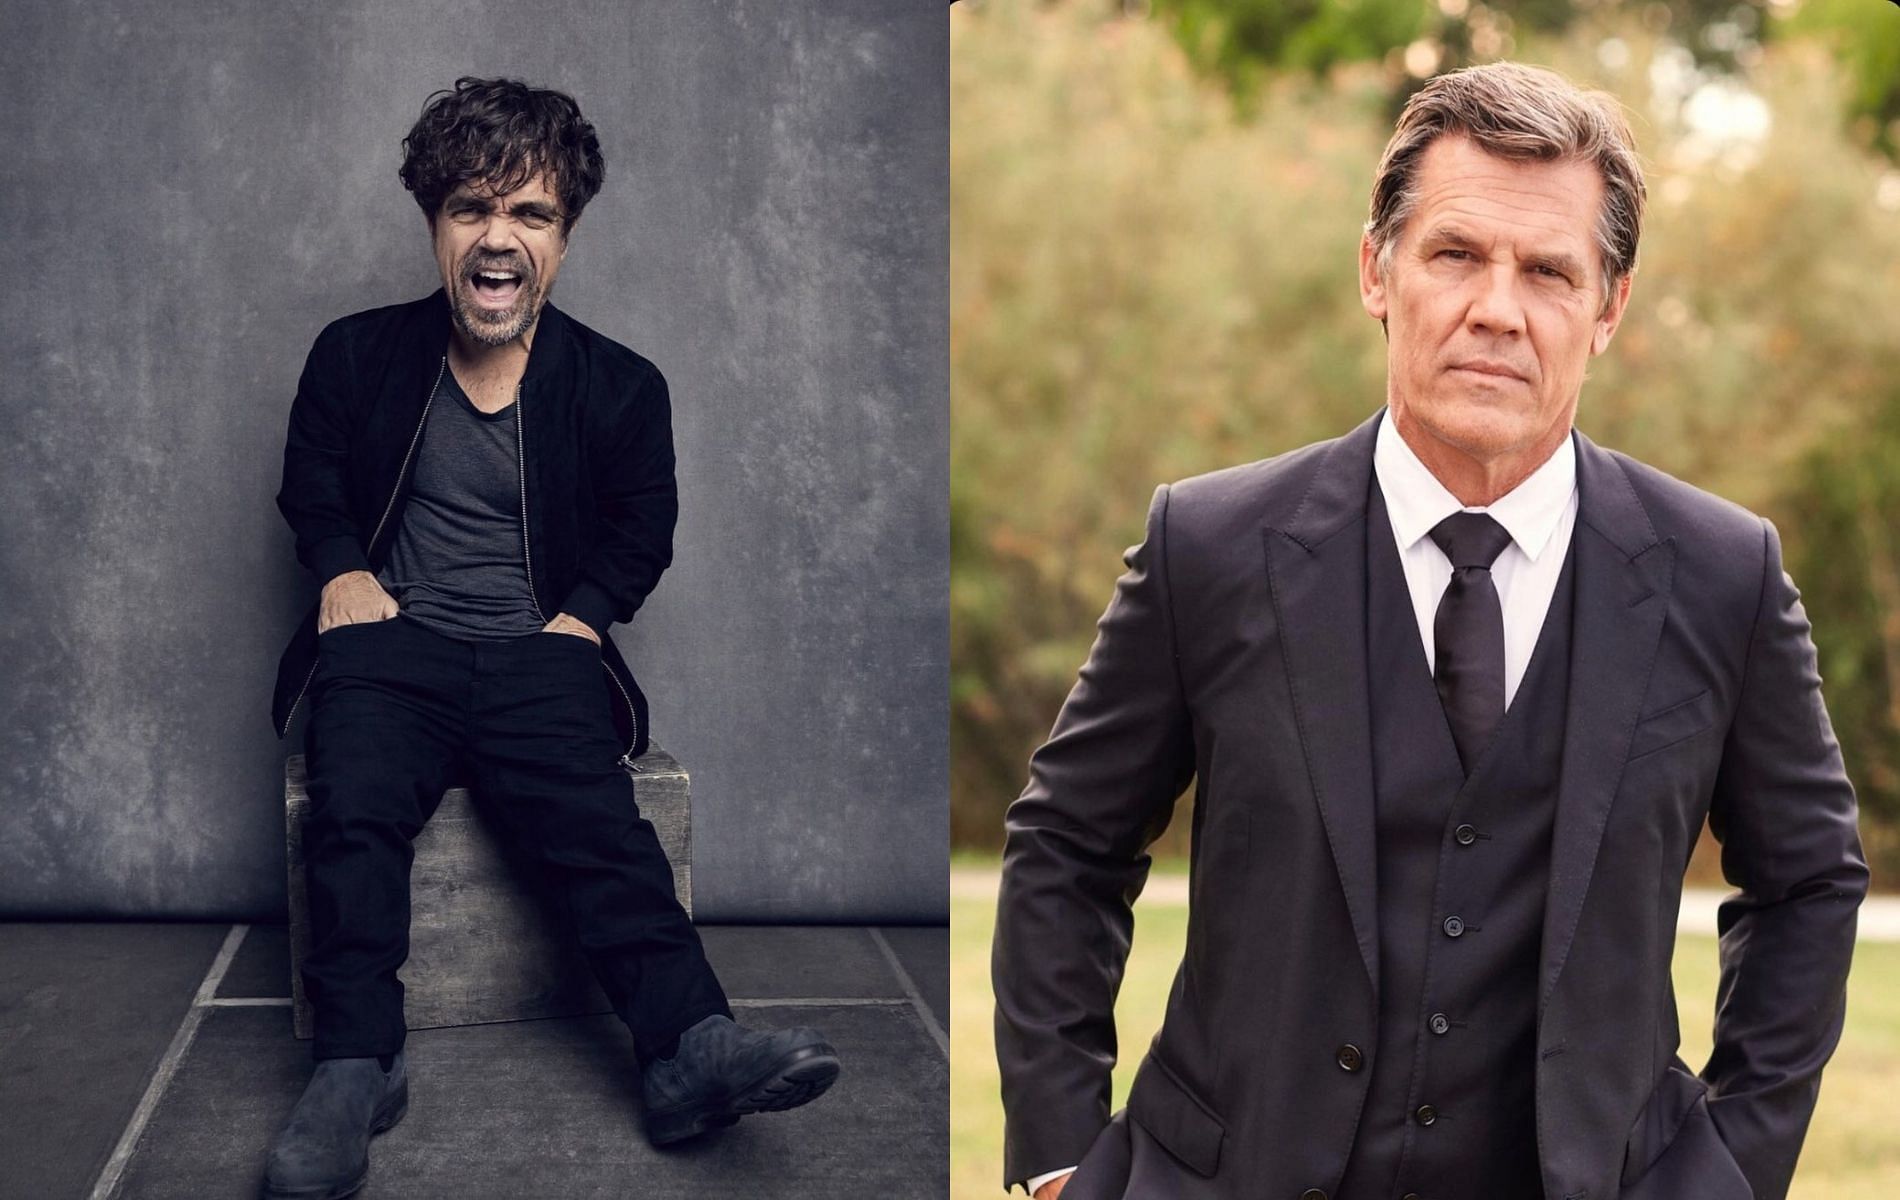 Josh Brolin and Peter Dinklage will star in Brothers. (Image via Peter Dinklage, Josh Brolin, Instagram)